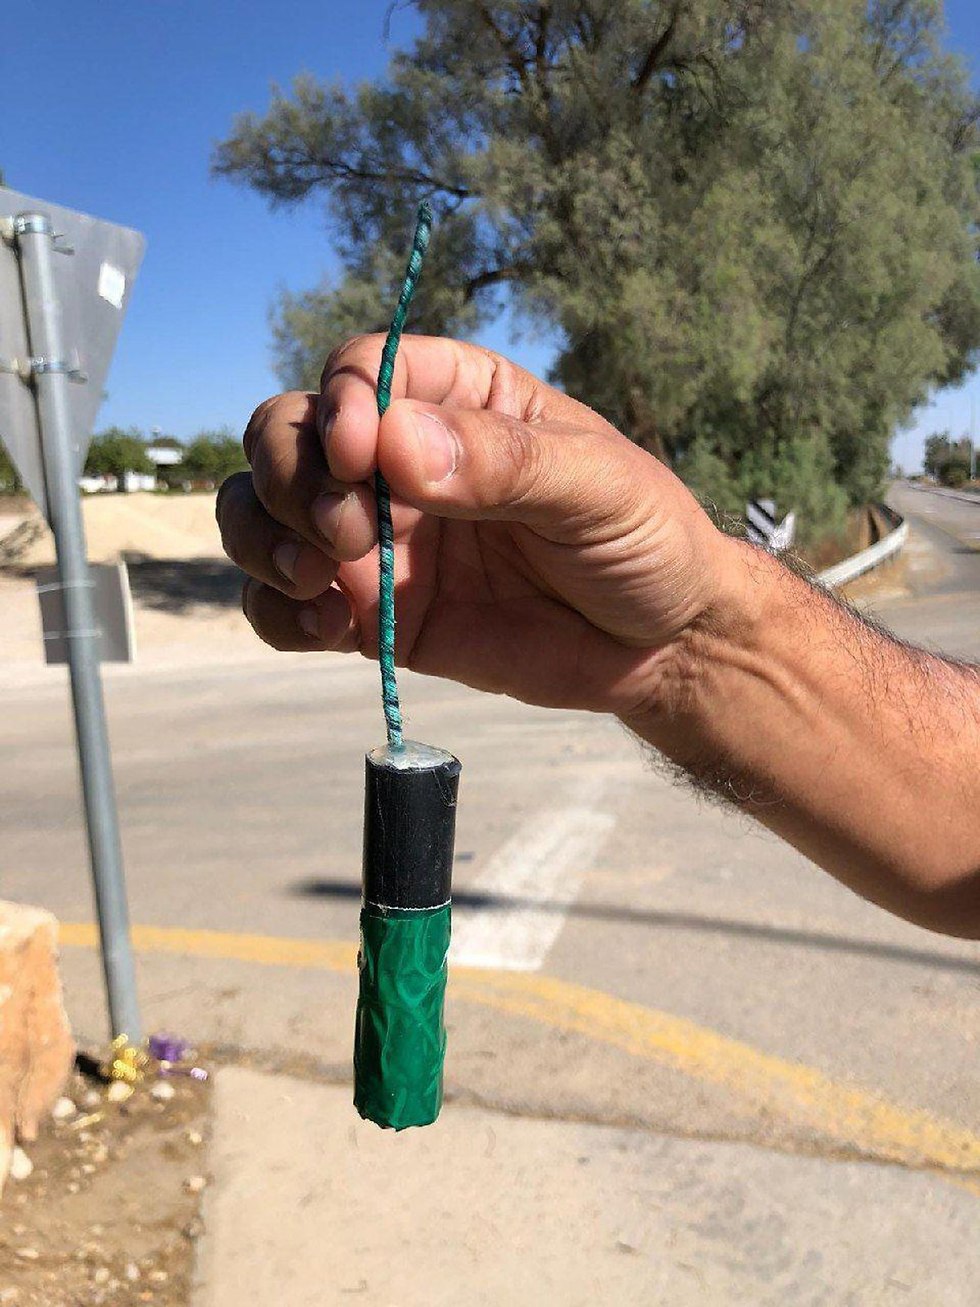 Explosive that was attached to balloon that landed in Eshkol kindergarten